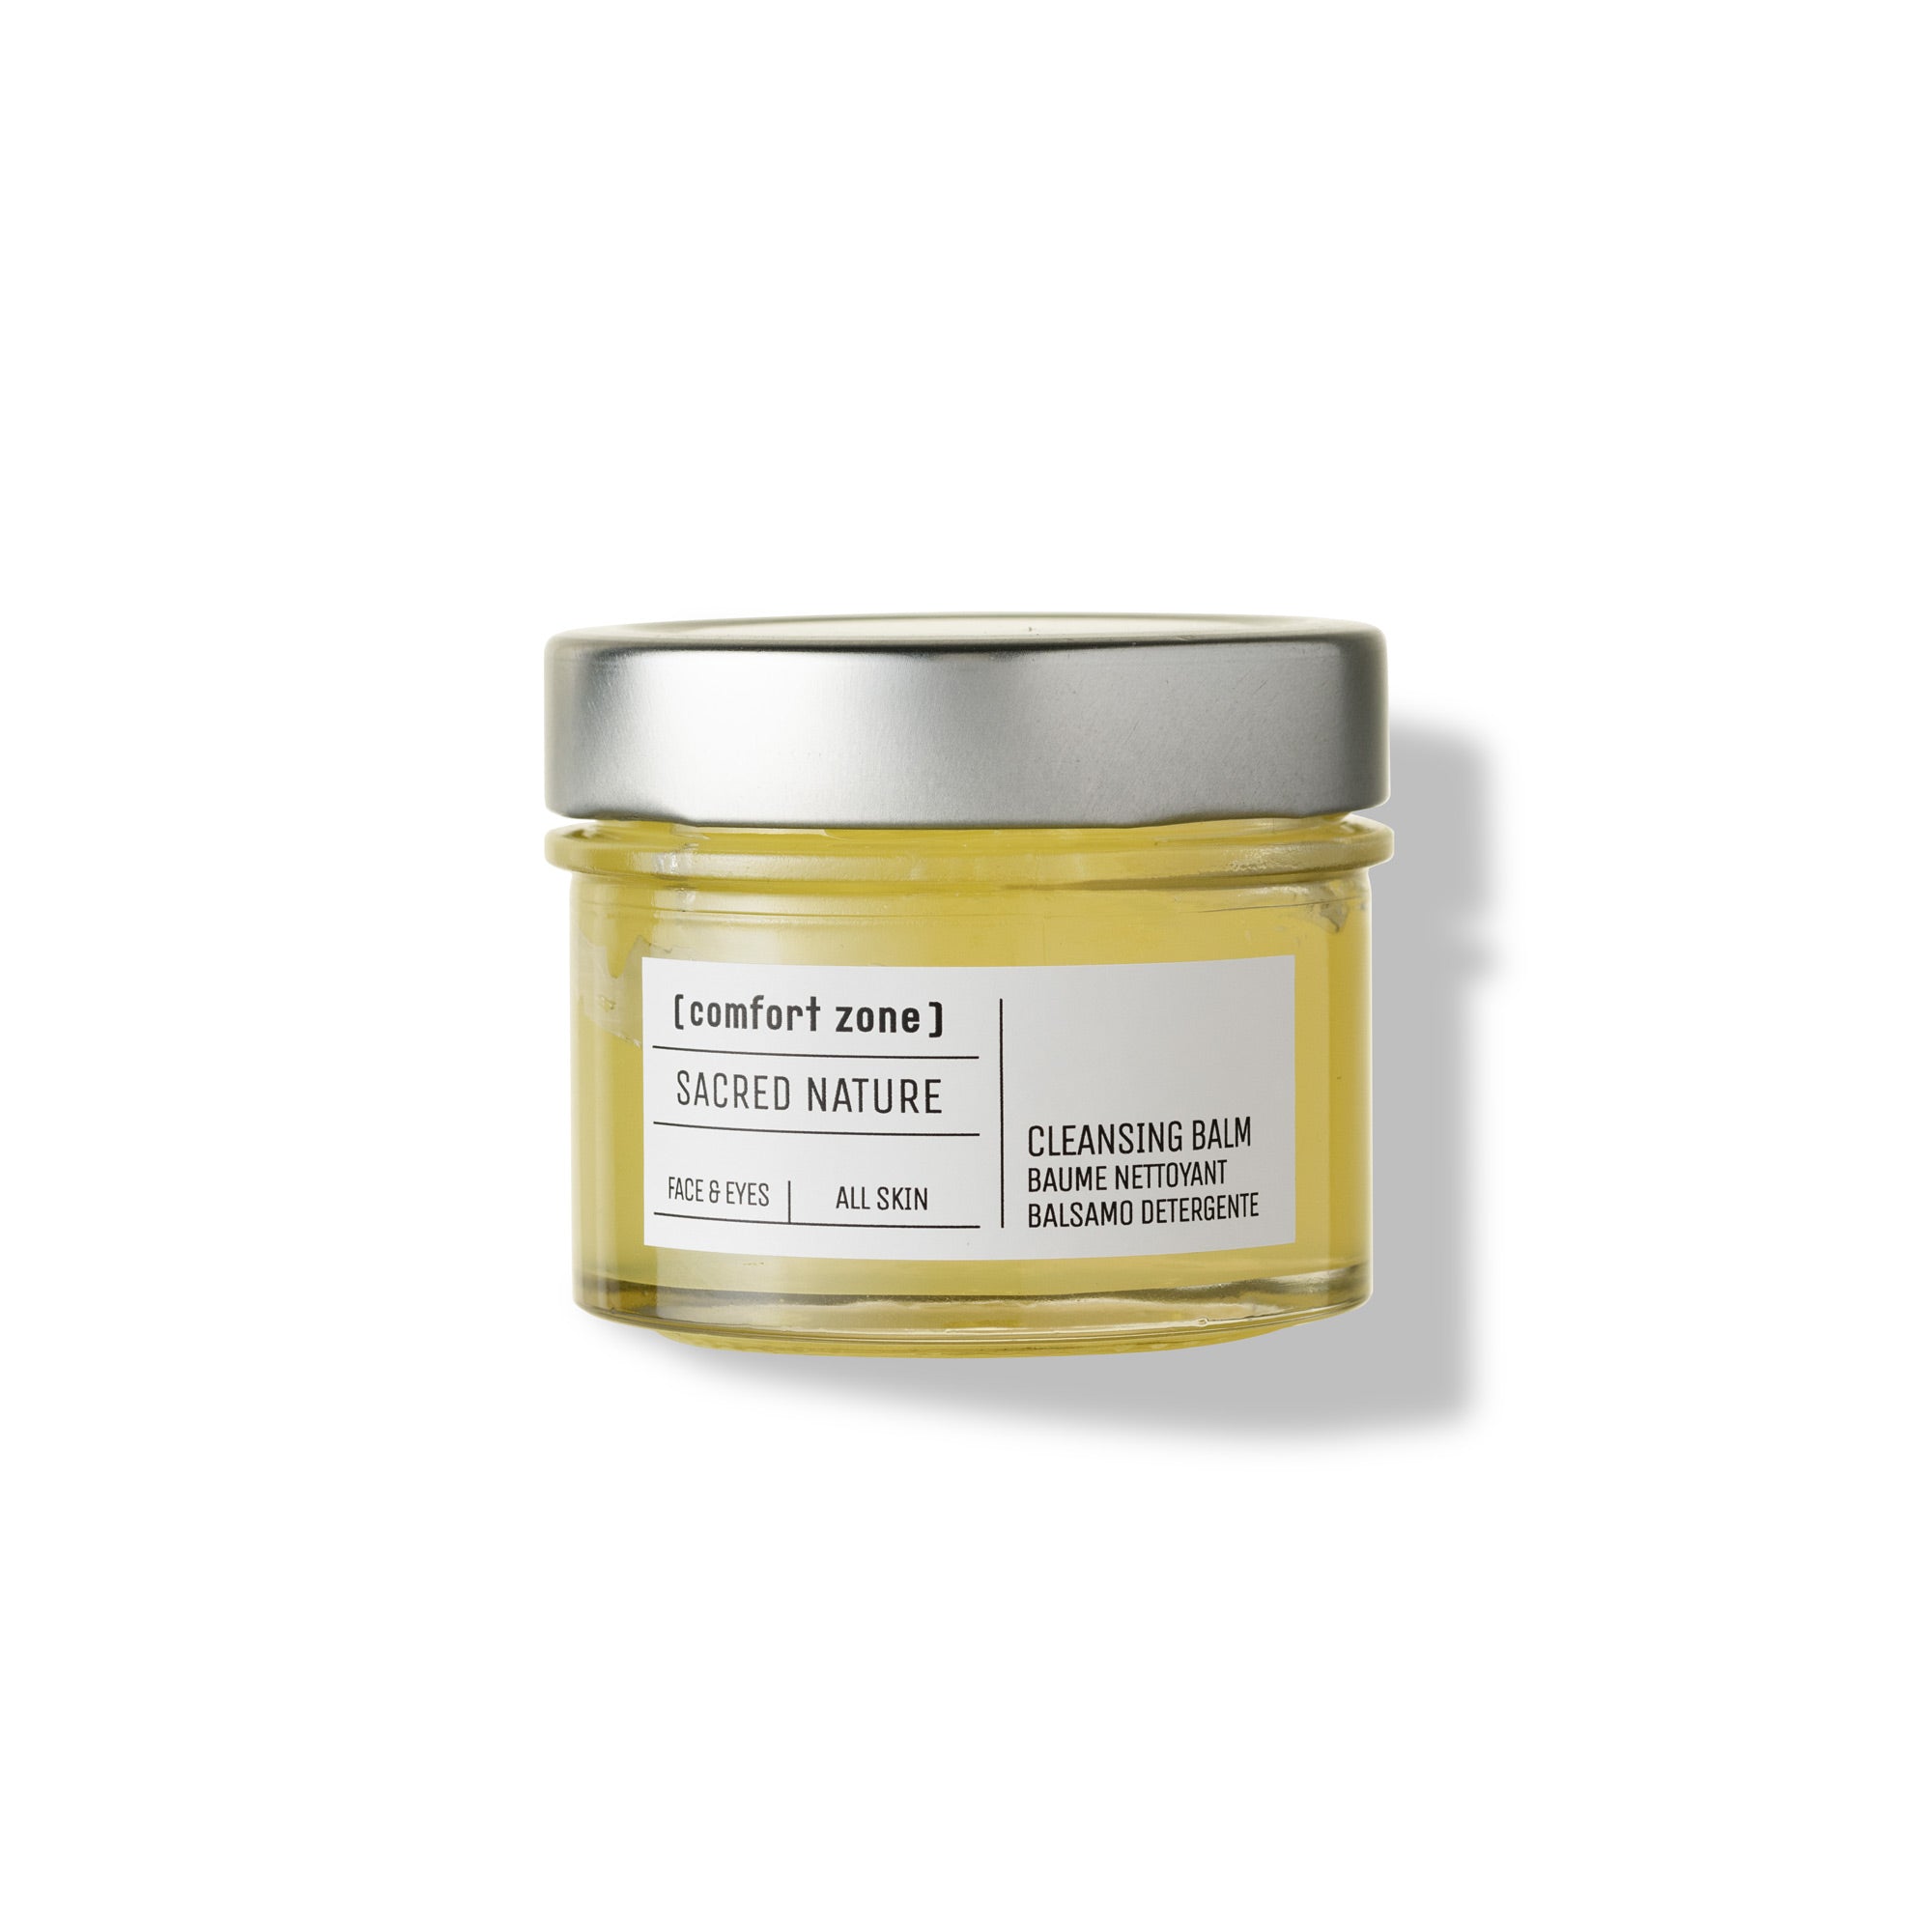 Comfort Zone: SACRED NATURE CLEANSING BALM Face and eyes organic balm cleanser-
